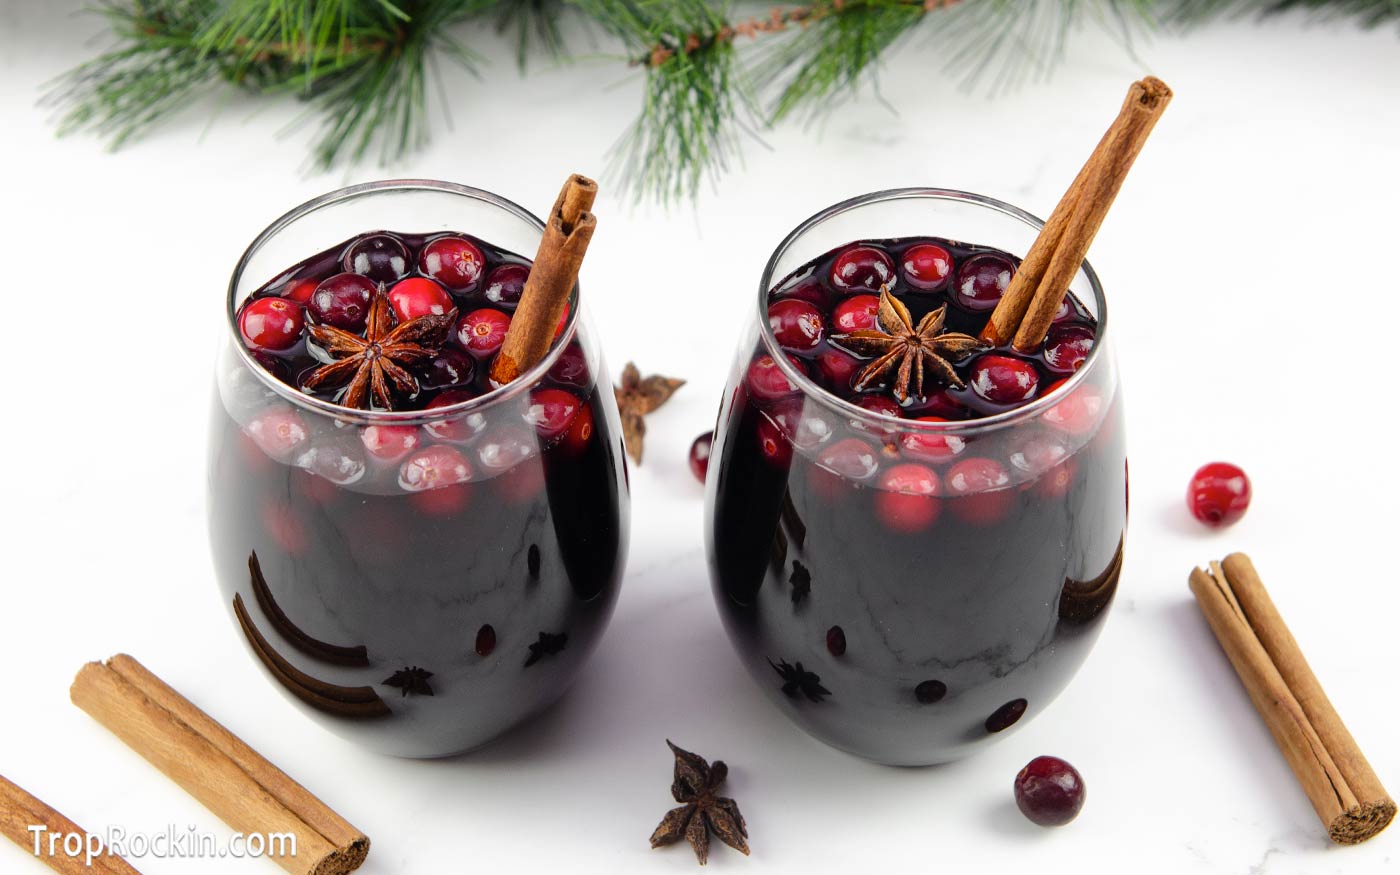 wo glasses of slow cooker mulled wine with cranberries, cinnamon stick and star anise for garnish.